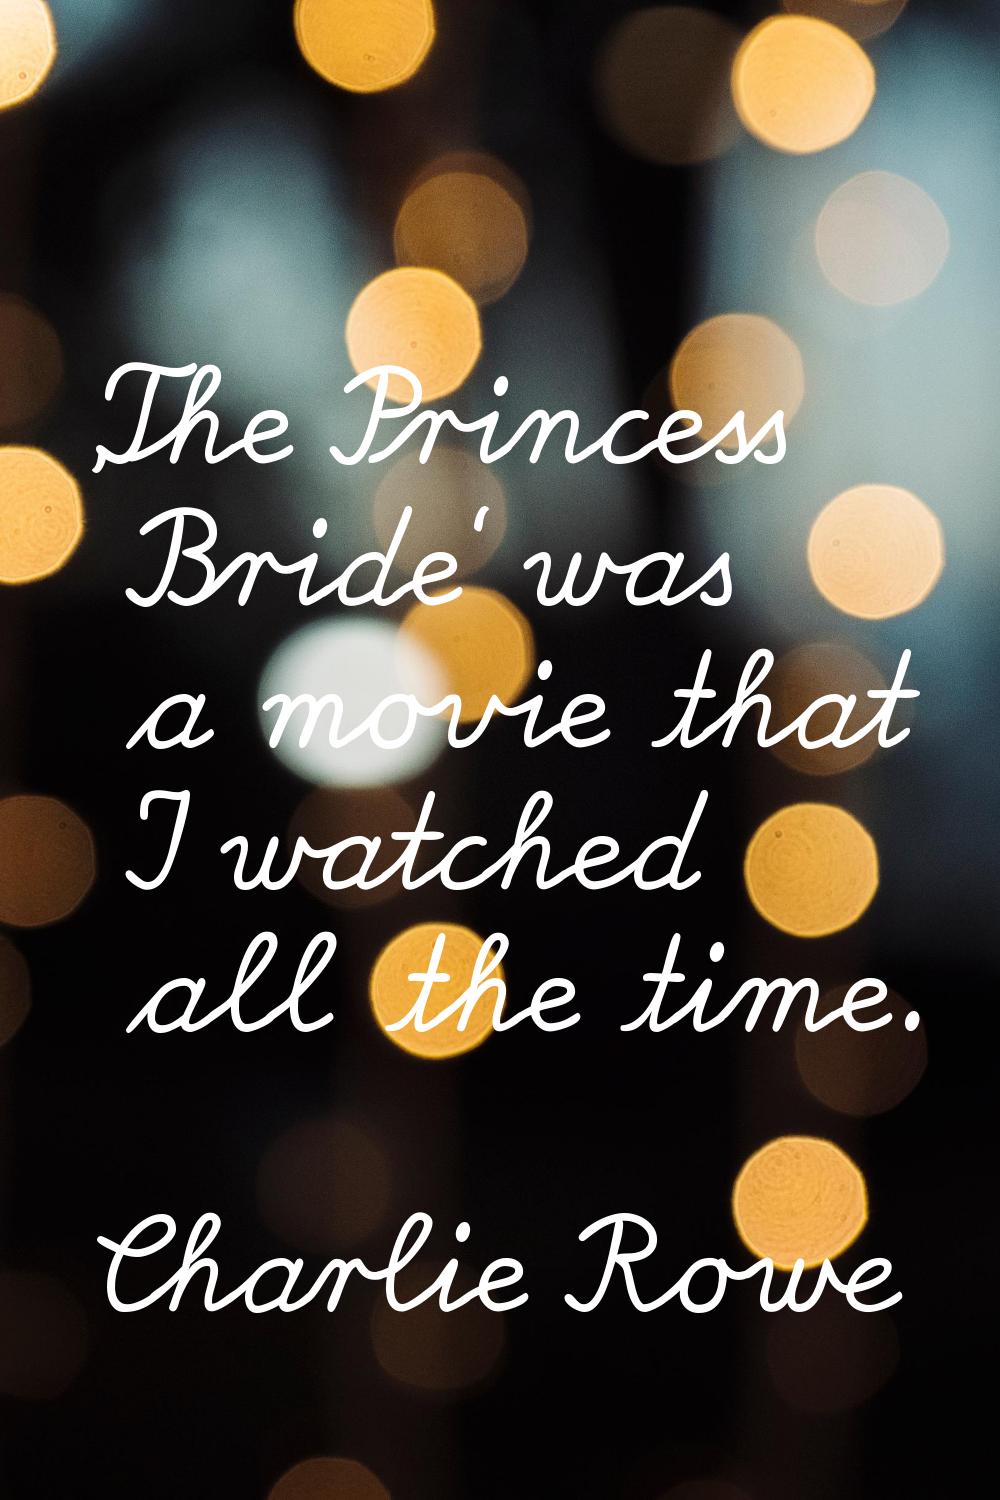 'The Princess Bride' was a movie that I watched all the time.